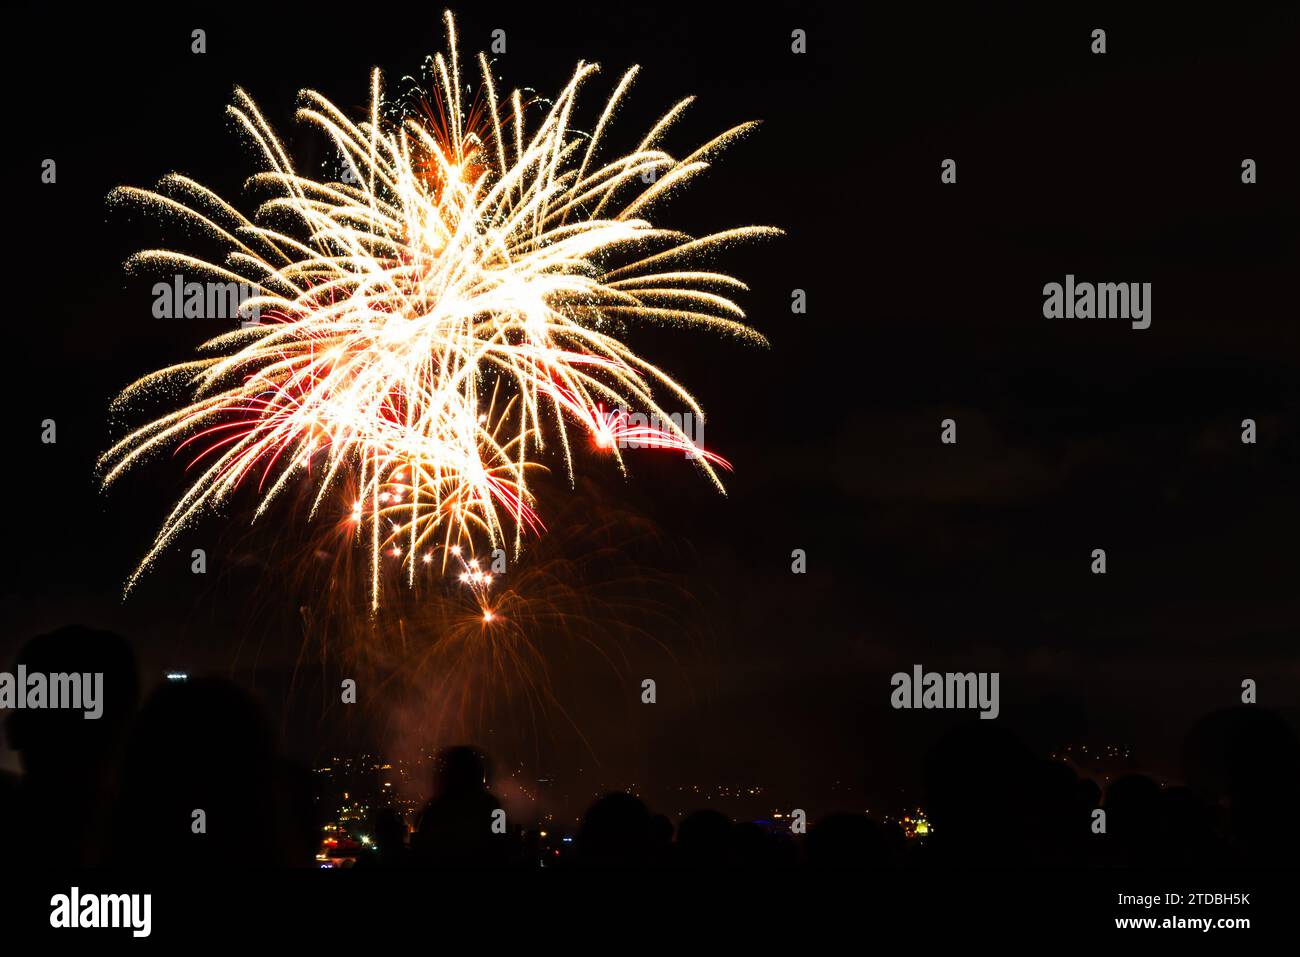 New year clebration firework in a park Stock Photo